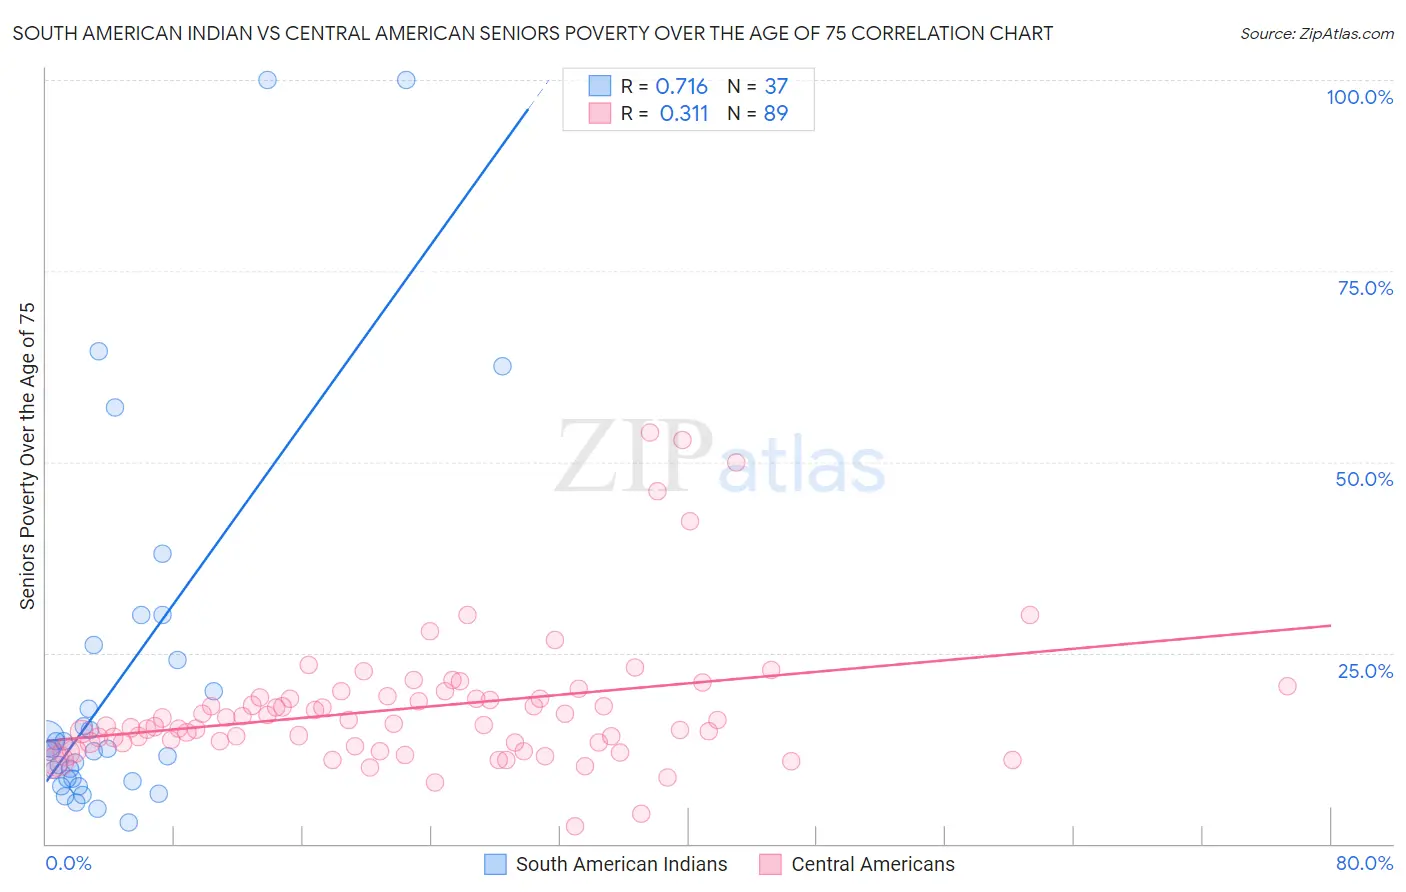 South American Indian vs Central American Seniors Poverty Over the Age of 75